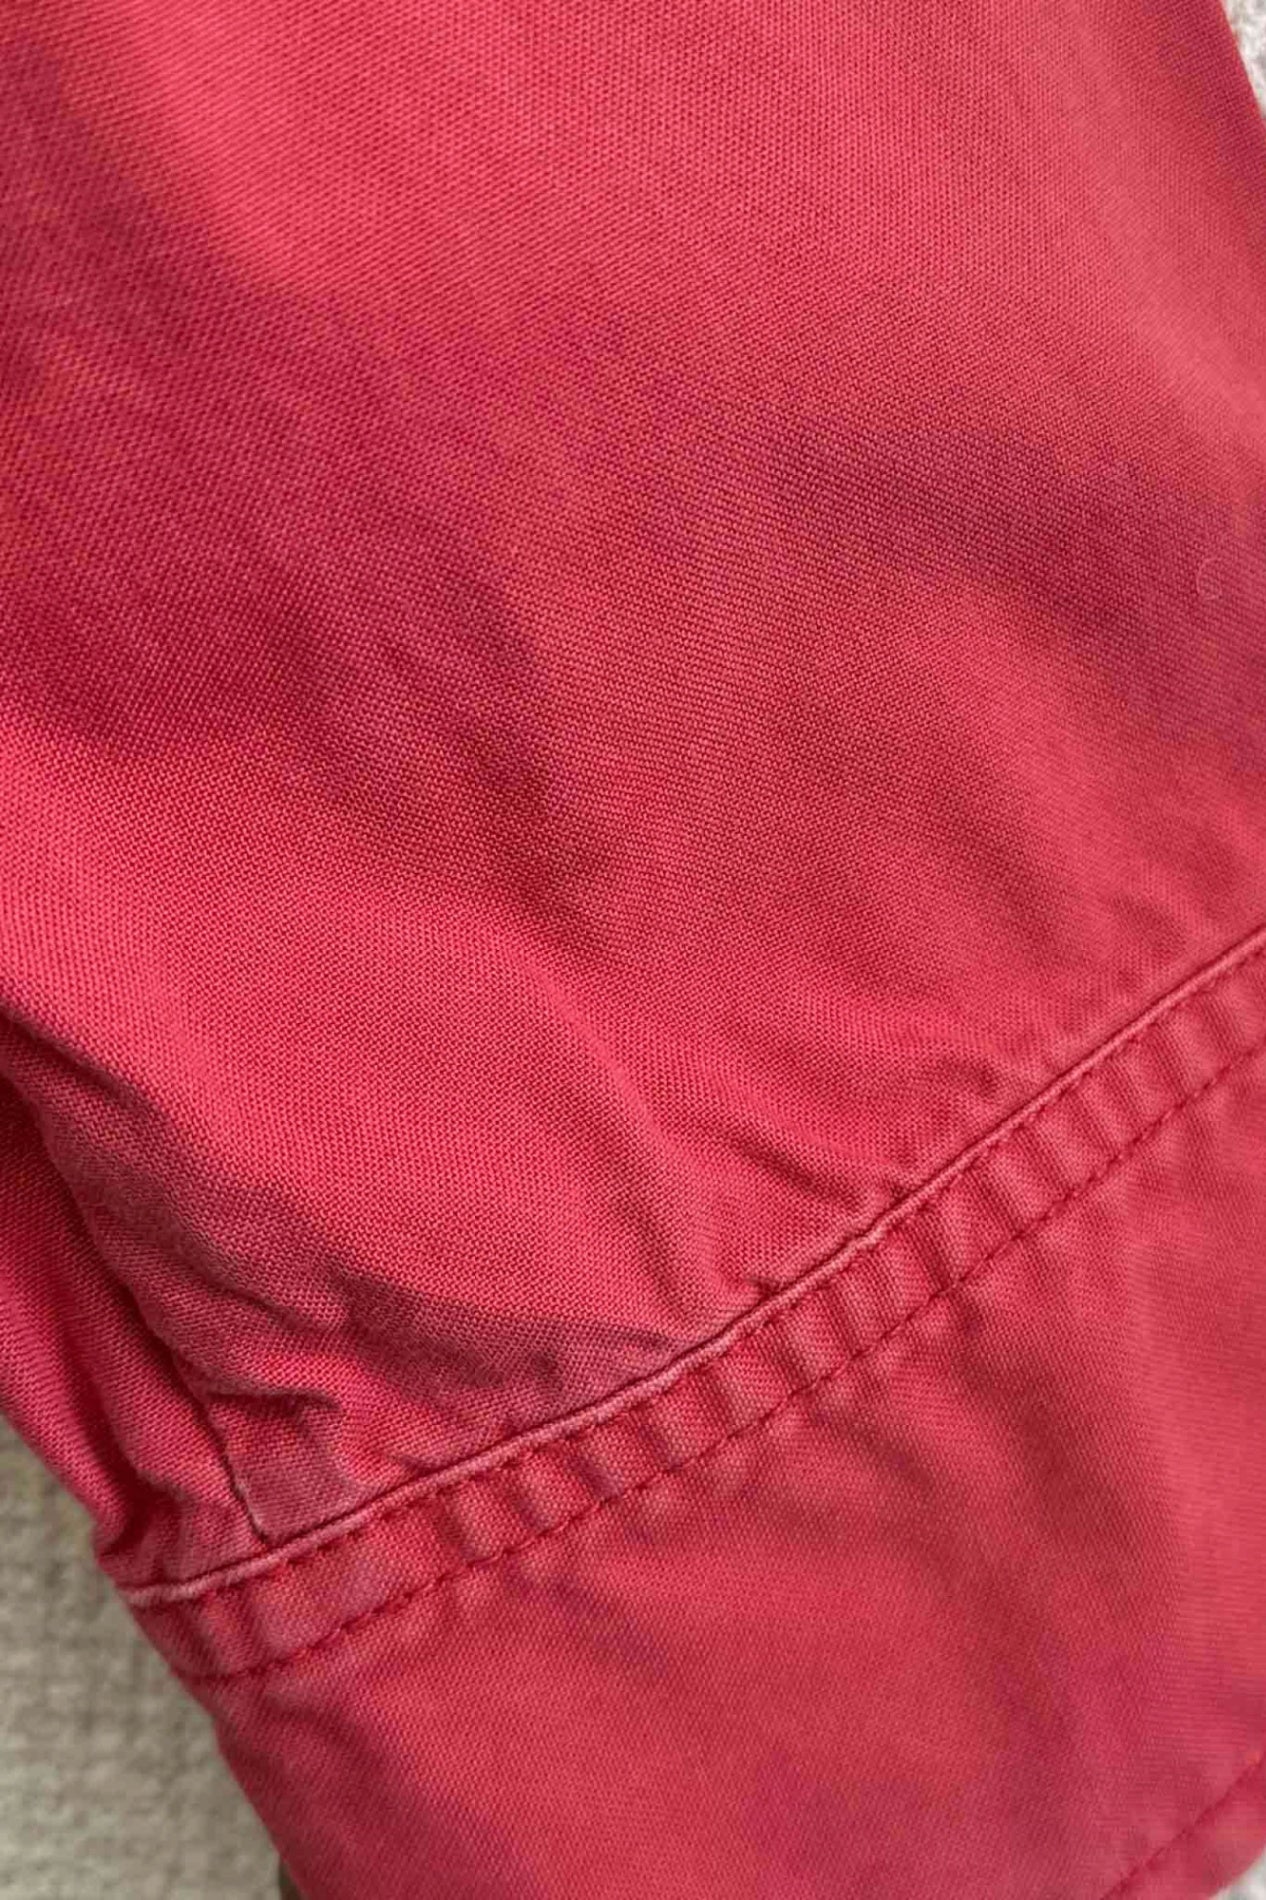 90's Polo by Ralph Lauren red cotton jacket